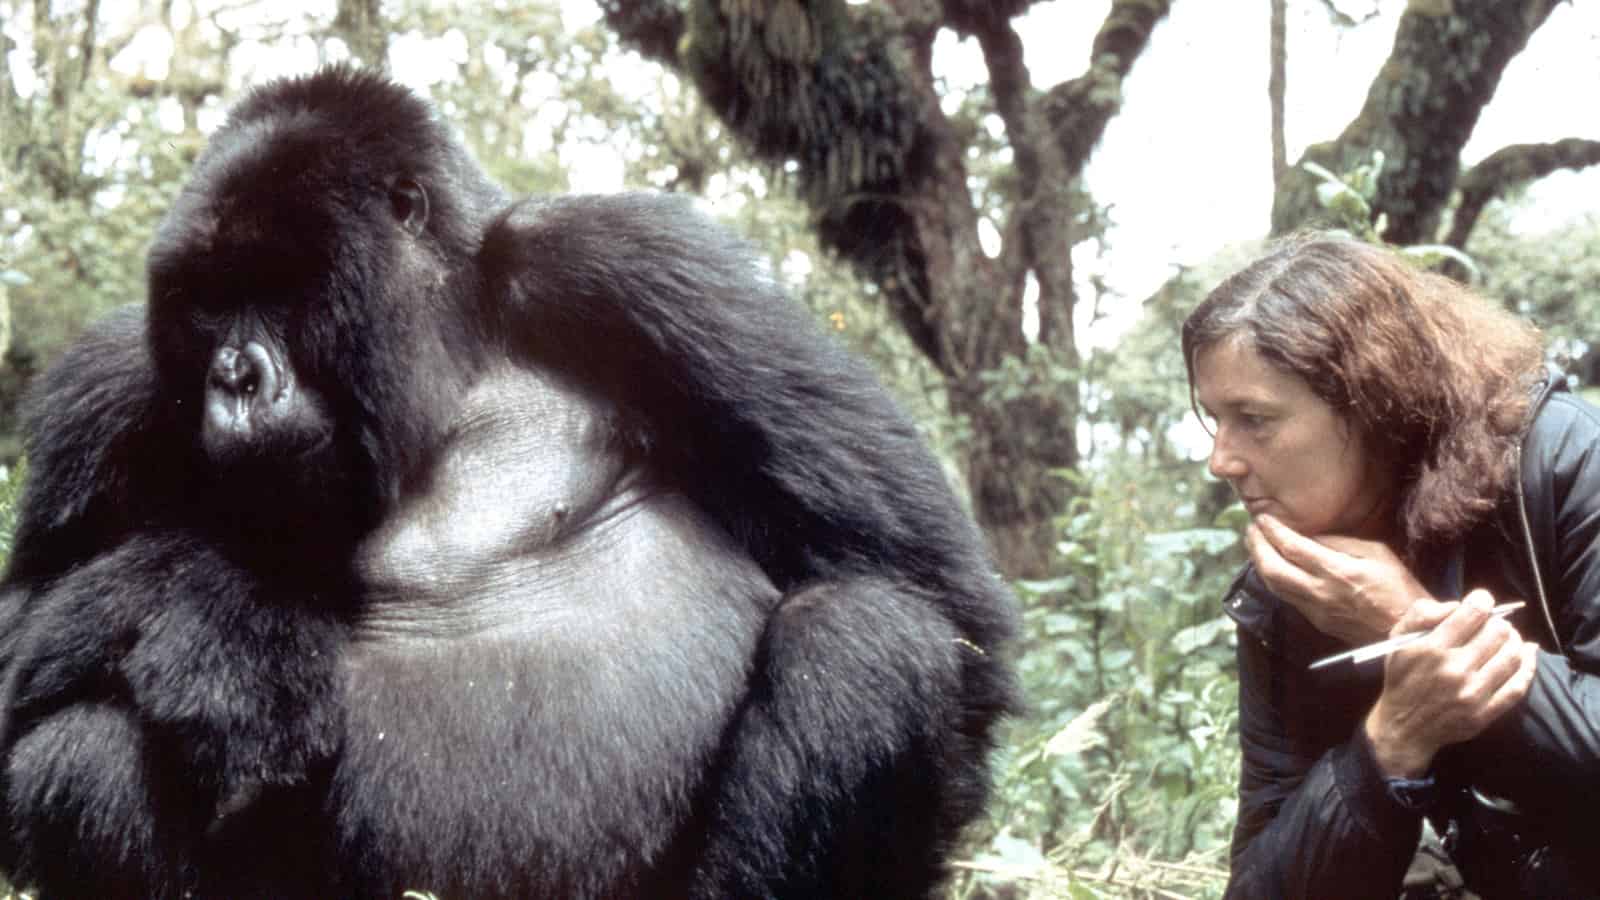 Dian Fossey and Digit